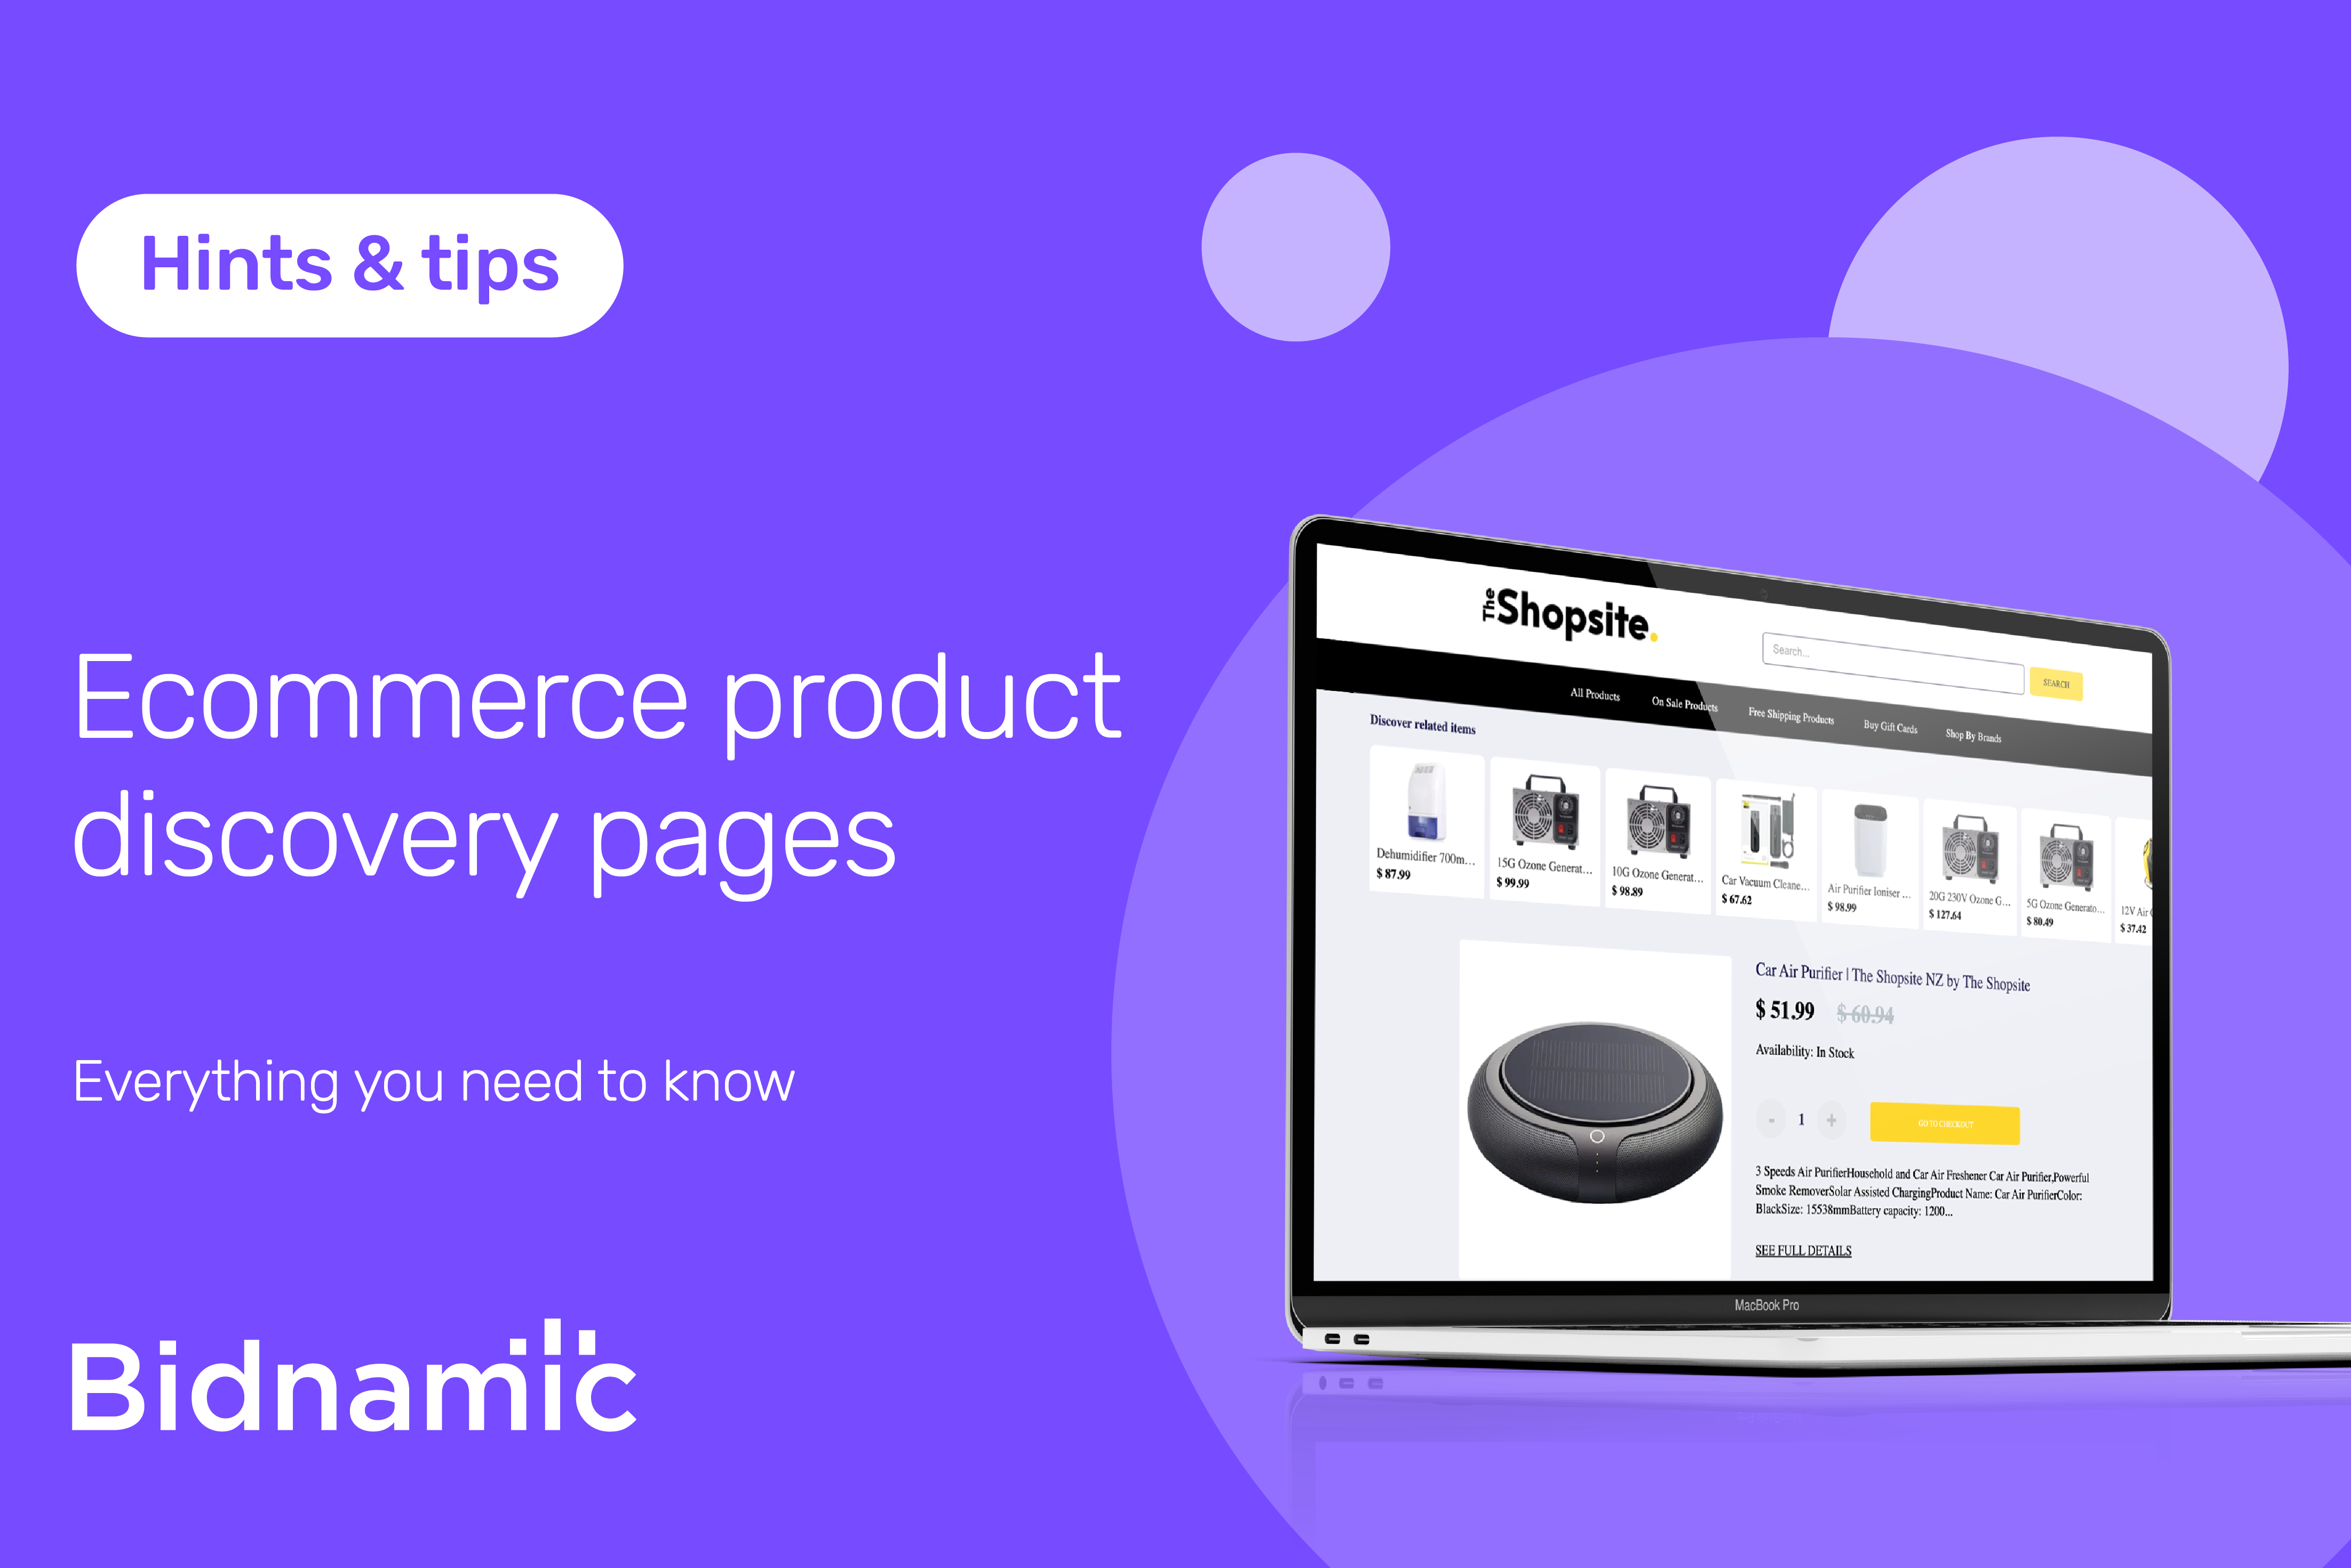 Ecommerce product discovery pages: everything you need to know